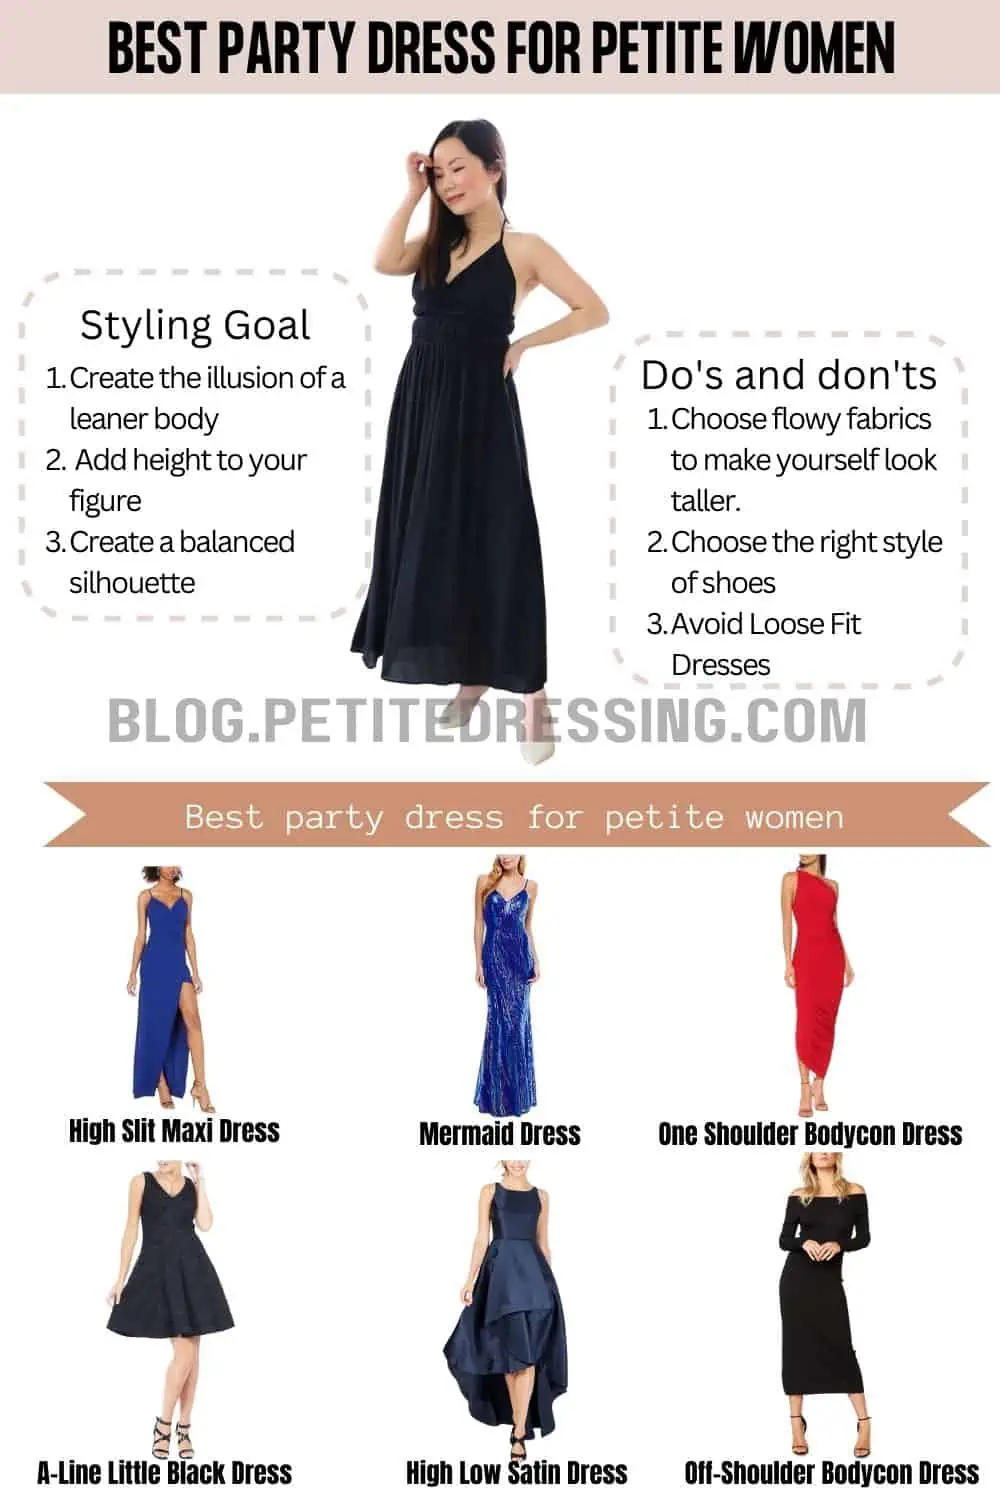 I'm 5'2, and here's the Complete Party Dress Guide for Petite